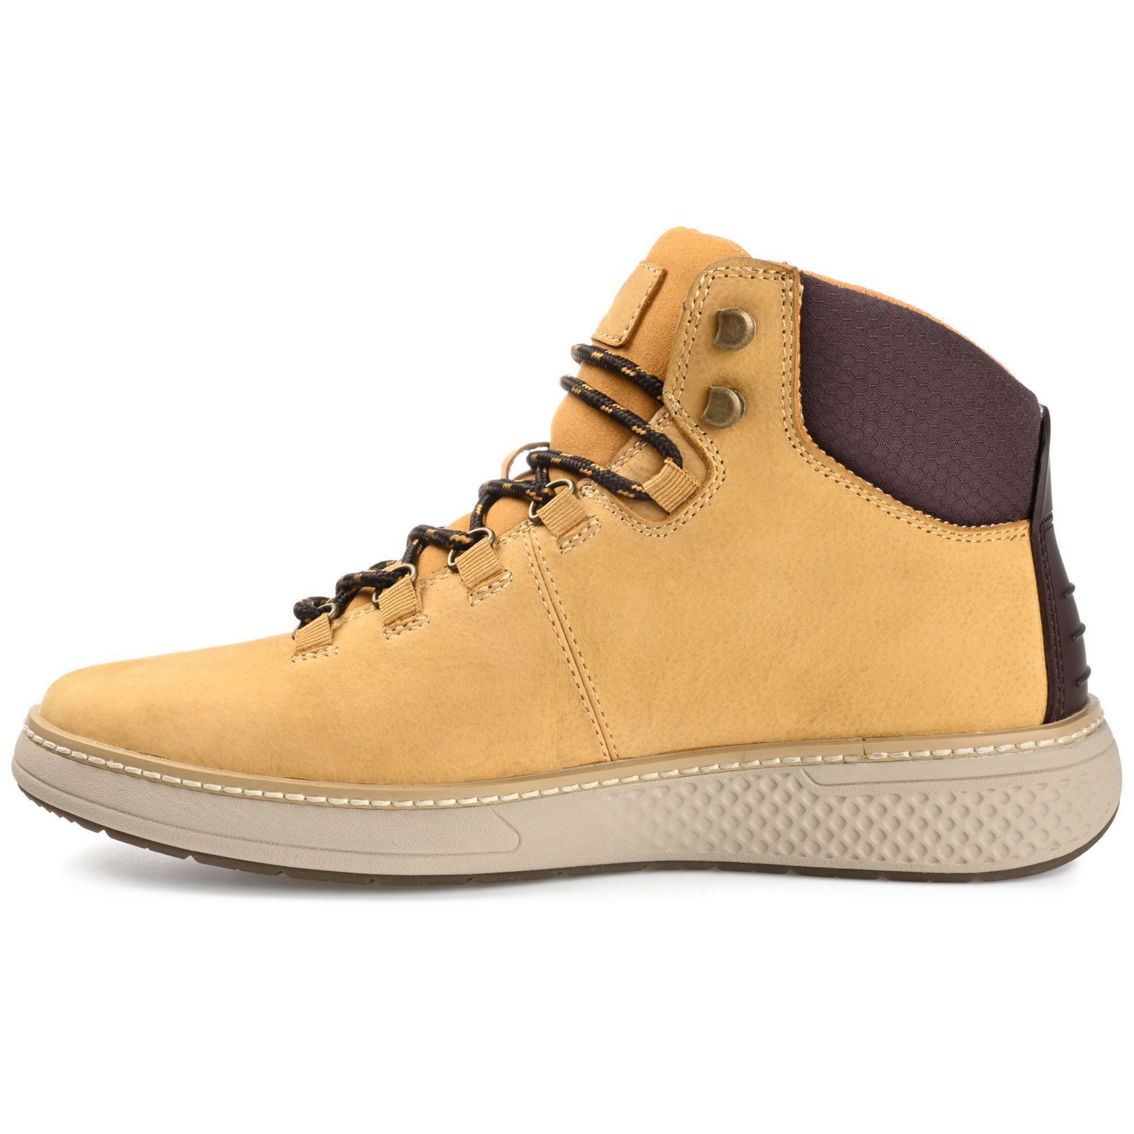 Territory Compass Ankle Boot - Image 4 of 4